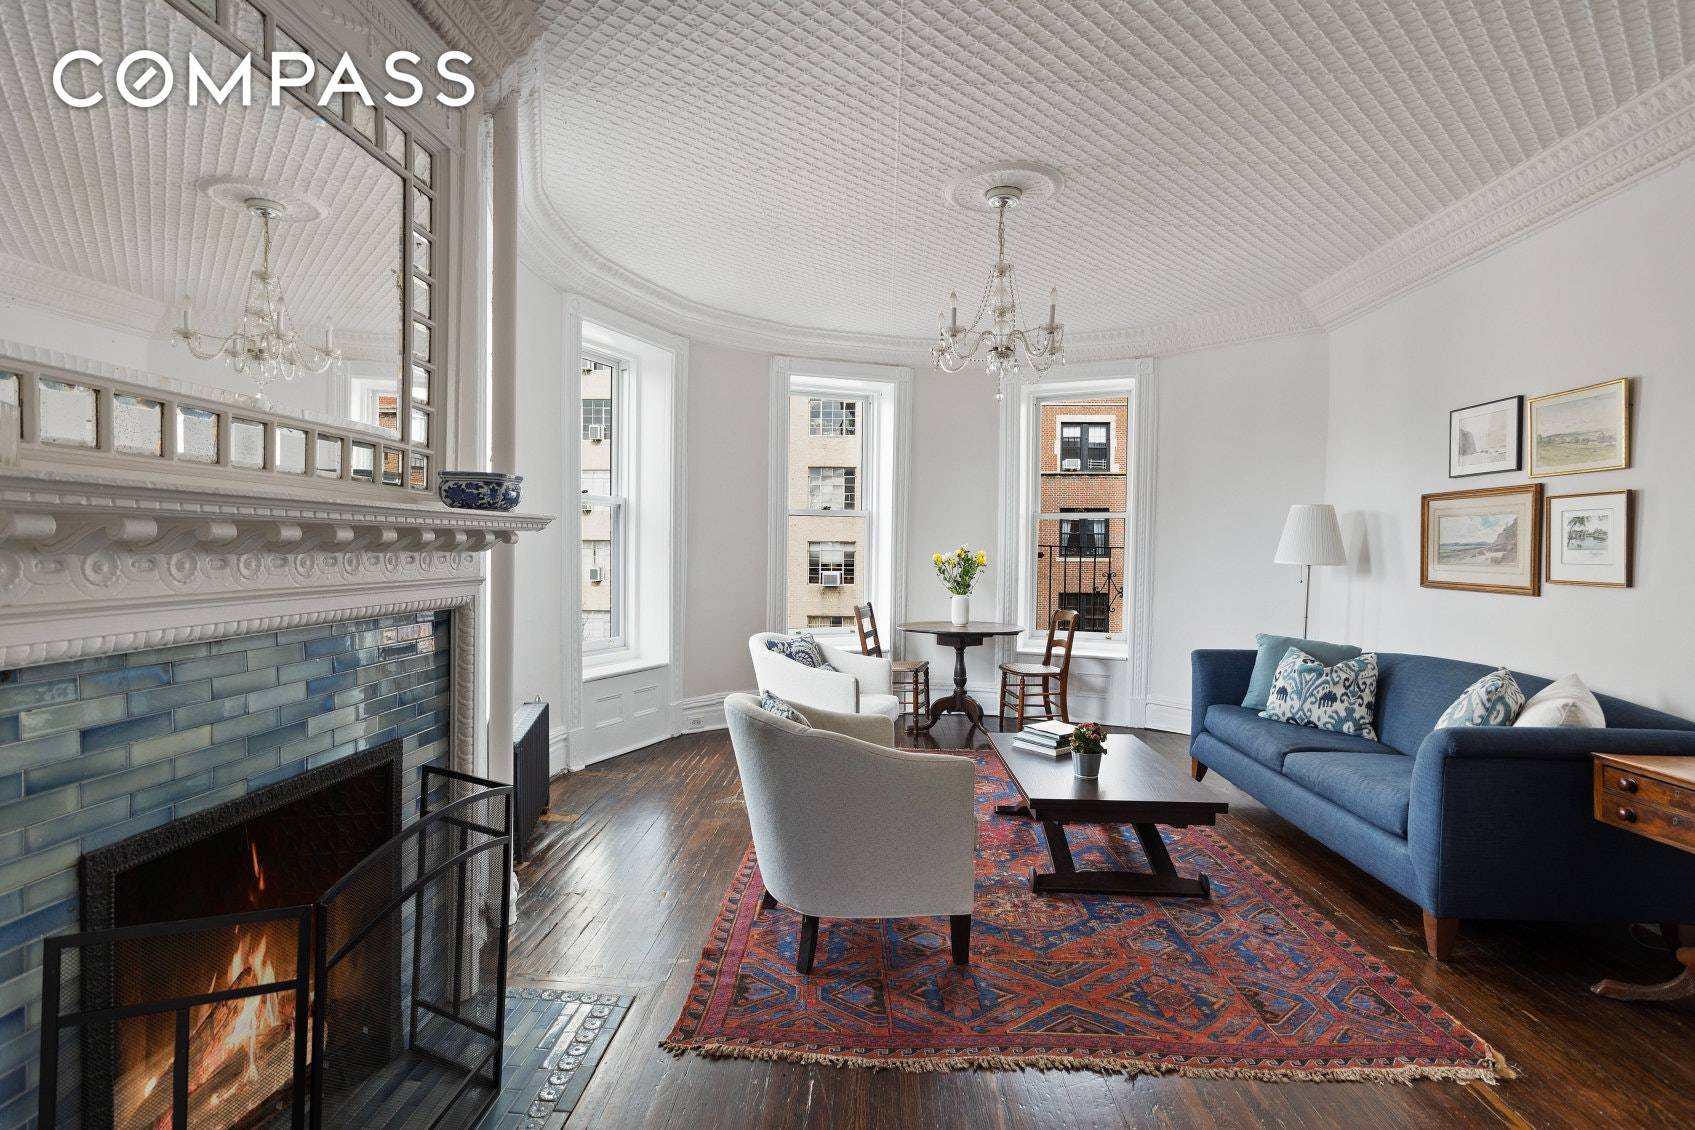 OFFER ACCEPTED. Elegance, space, and original detail all come together in this beautiful two bedroom home in The Arlington, one of Brooklyn Heights most coveted addresses.